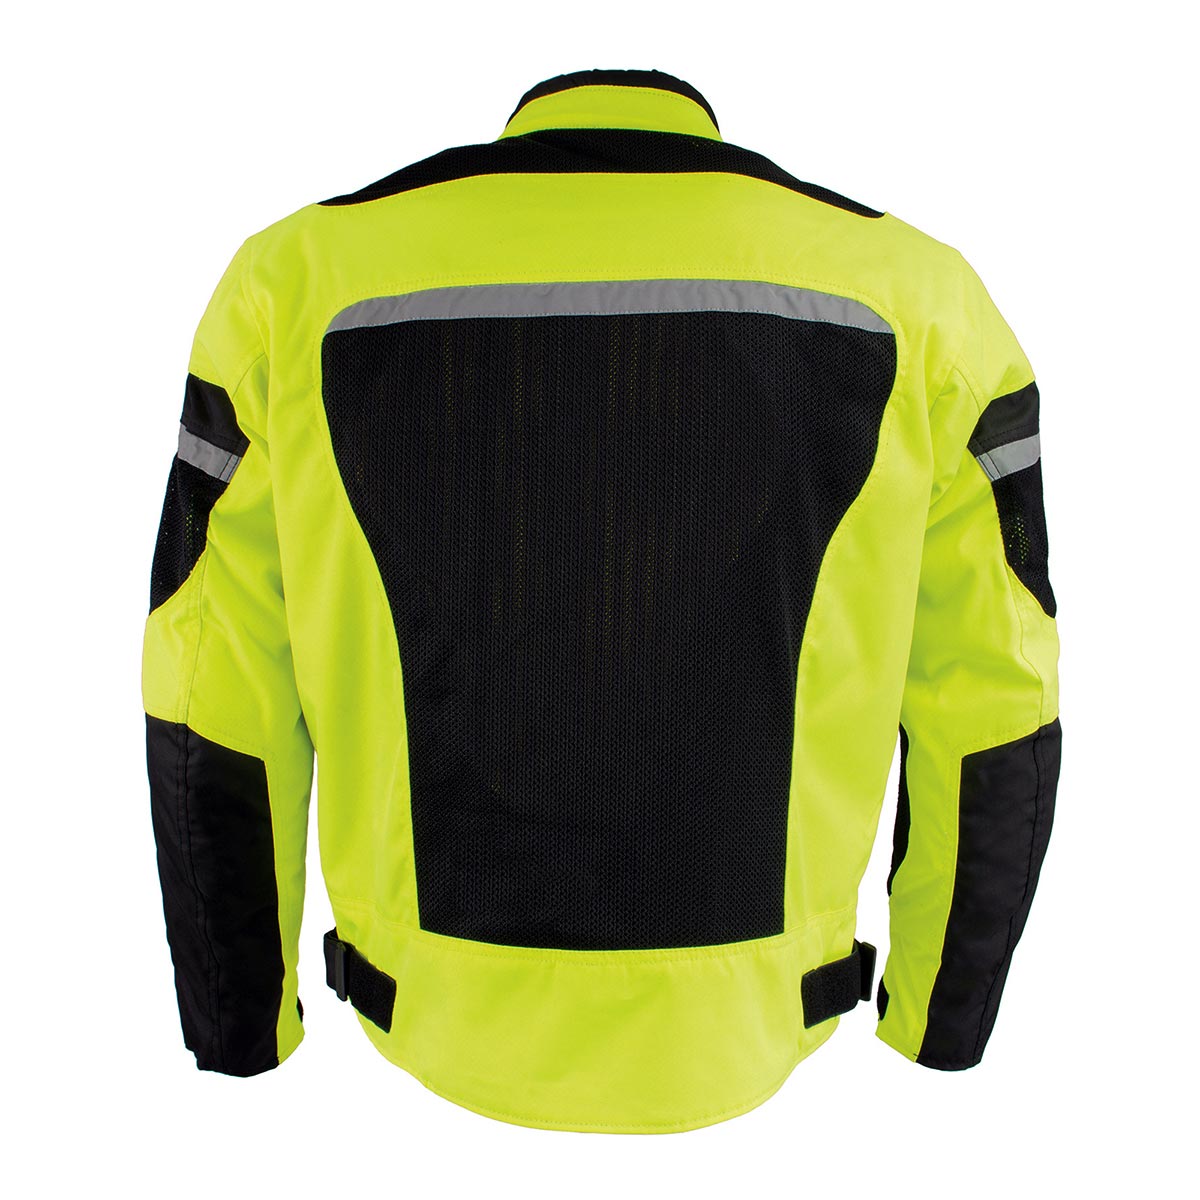 Milwaukee Leather MPM1794 High Vis Green Armored Mesh Racer Jacket with Reflective Piping for Men - All Season Jacket